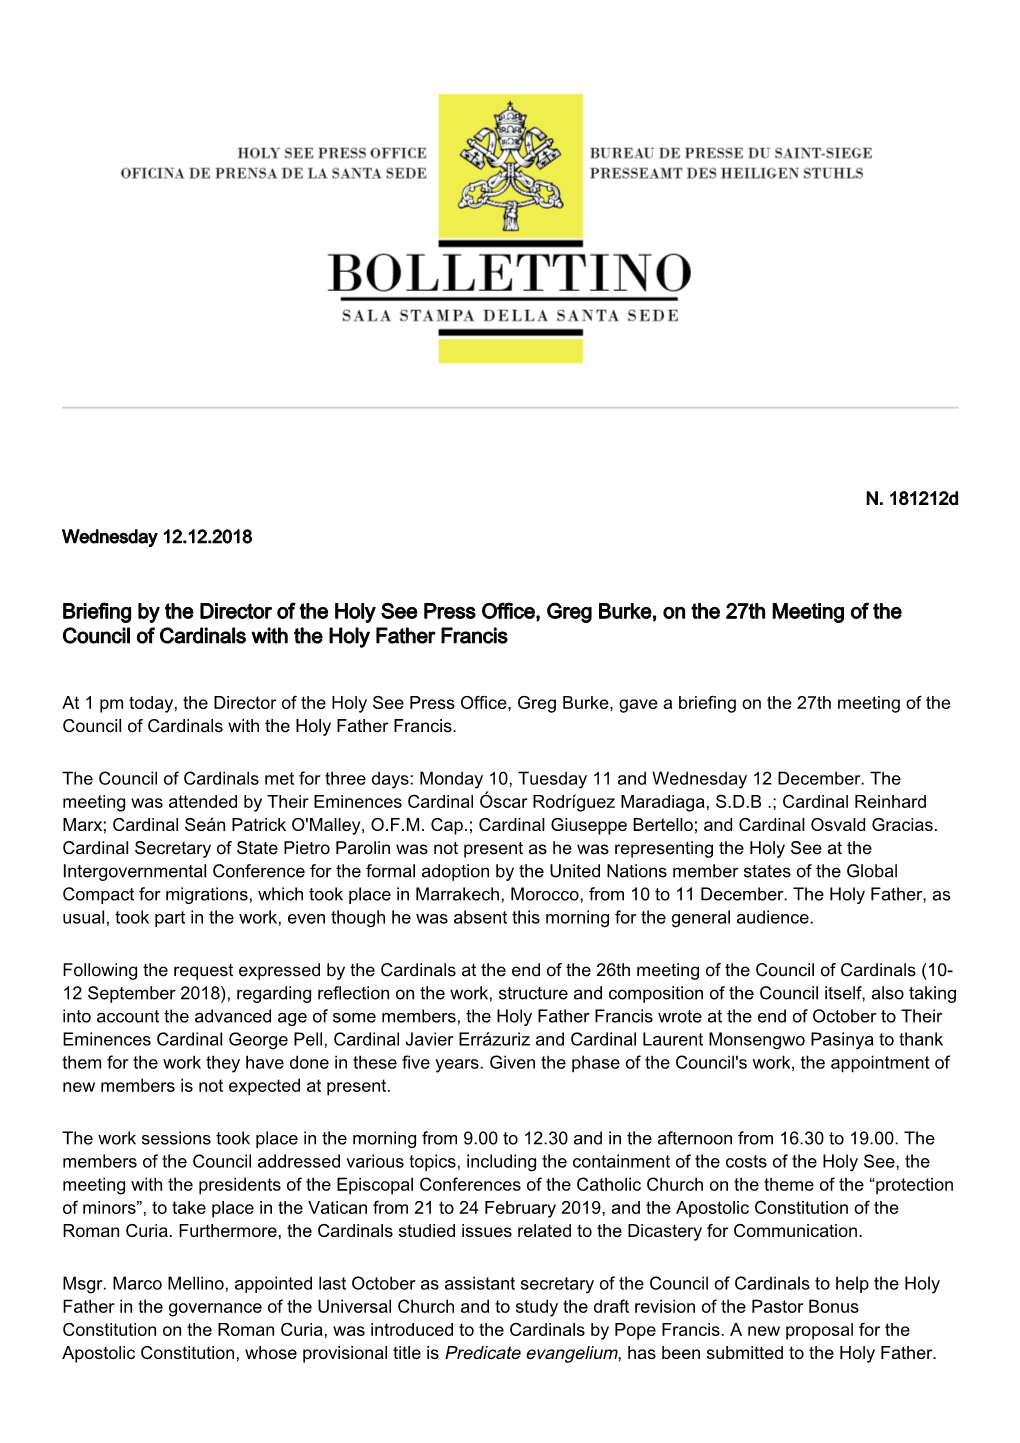 Briefing by the Director of the Holy See Press Office, Greg Burke, on the 27Th Meeting of the Council of Cardinals with the Holy Father Francis